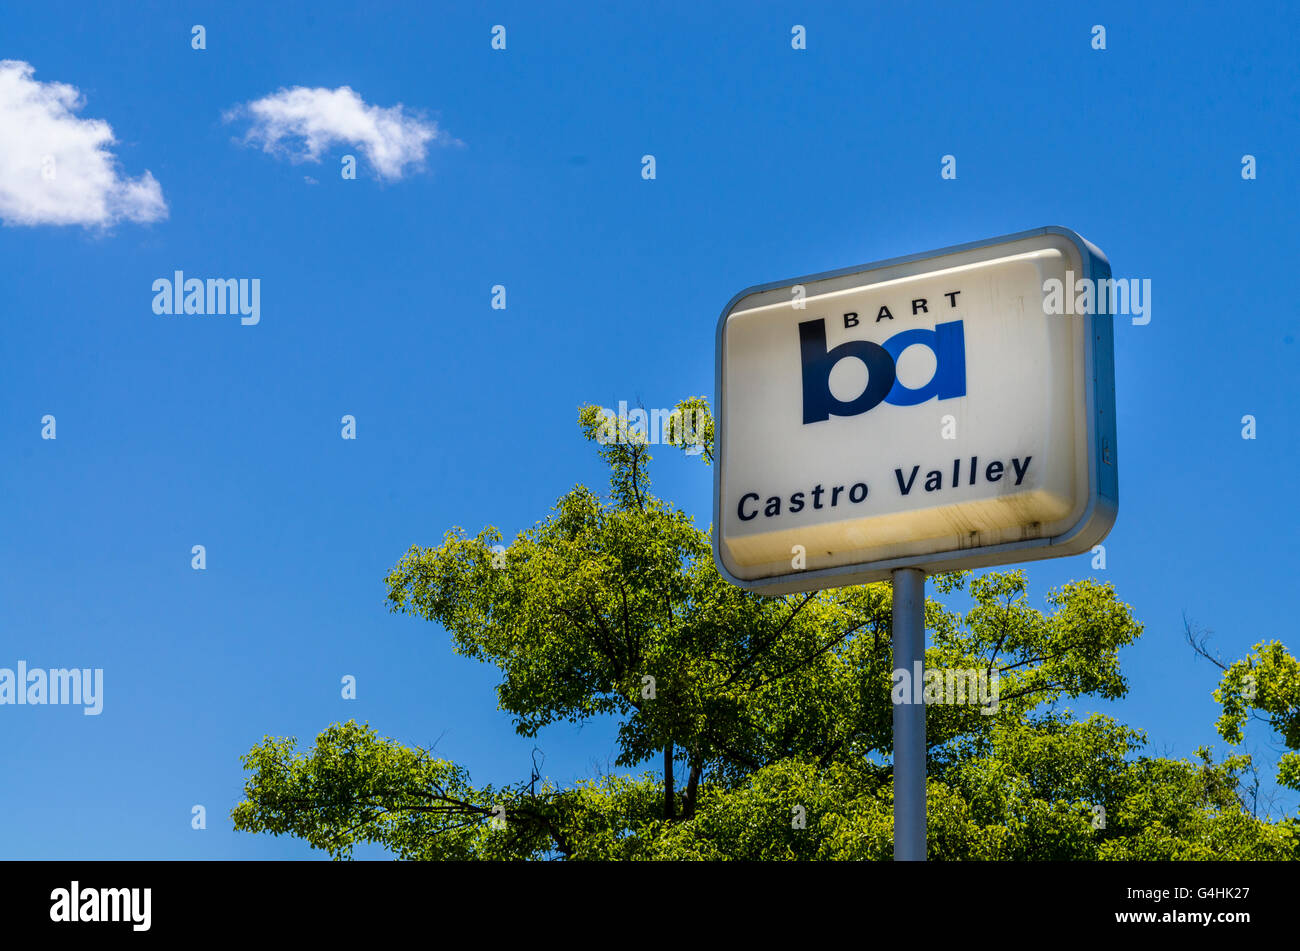 A Bart Station Sign in Castro Valley California east of San Francisco Stock Photo